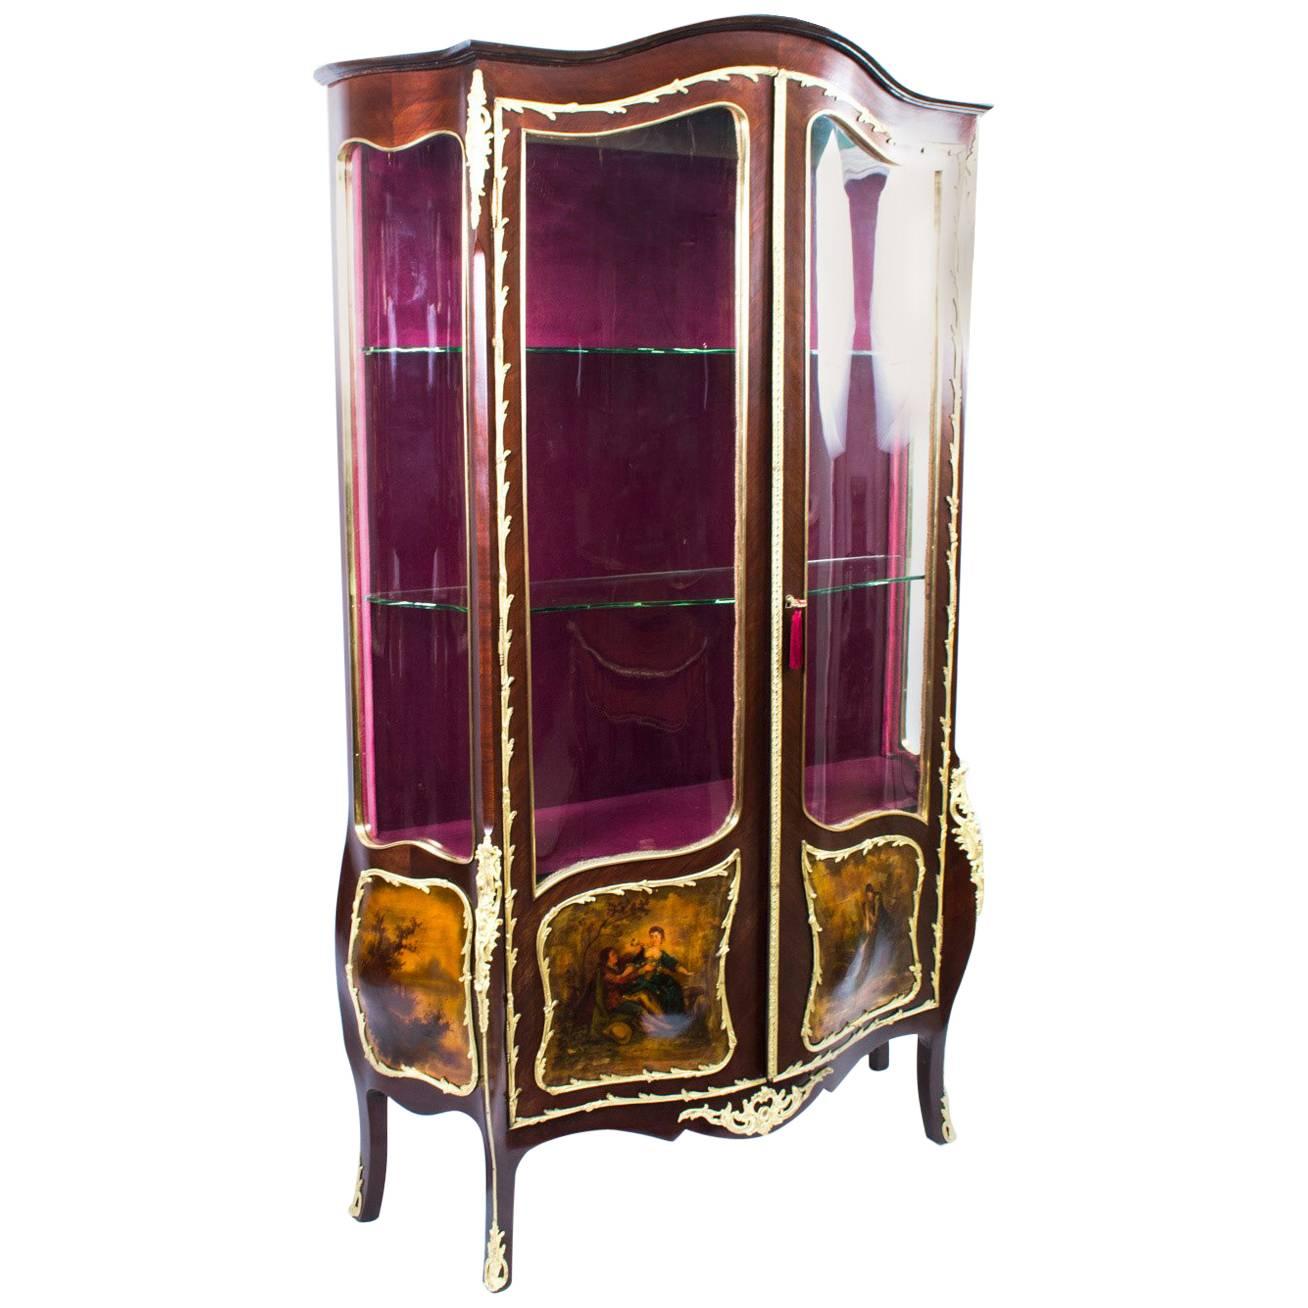 19th Century French Kingwood Vernis Martin Display Cabinet